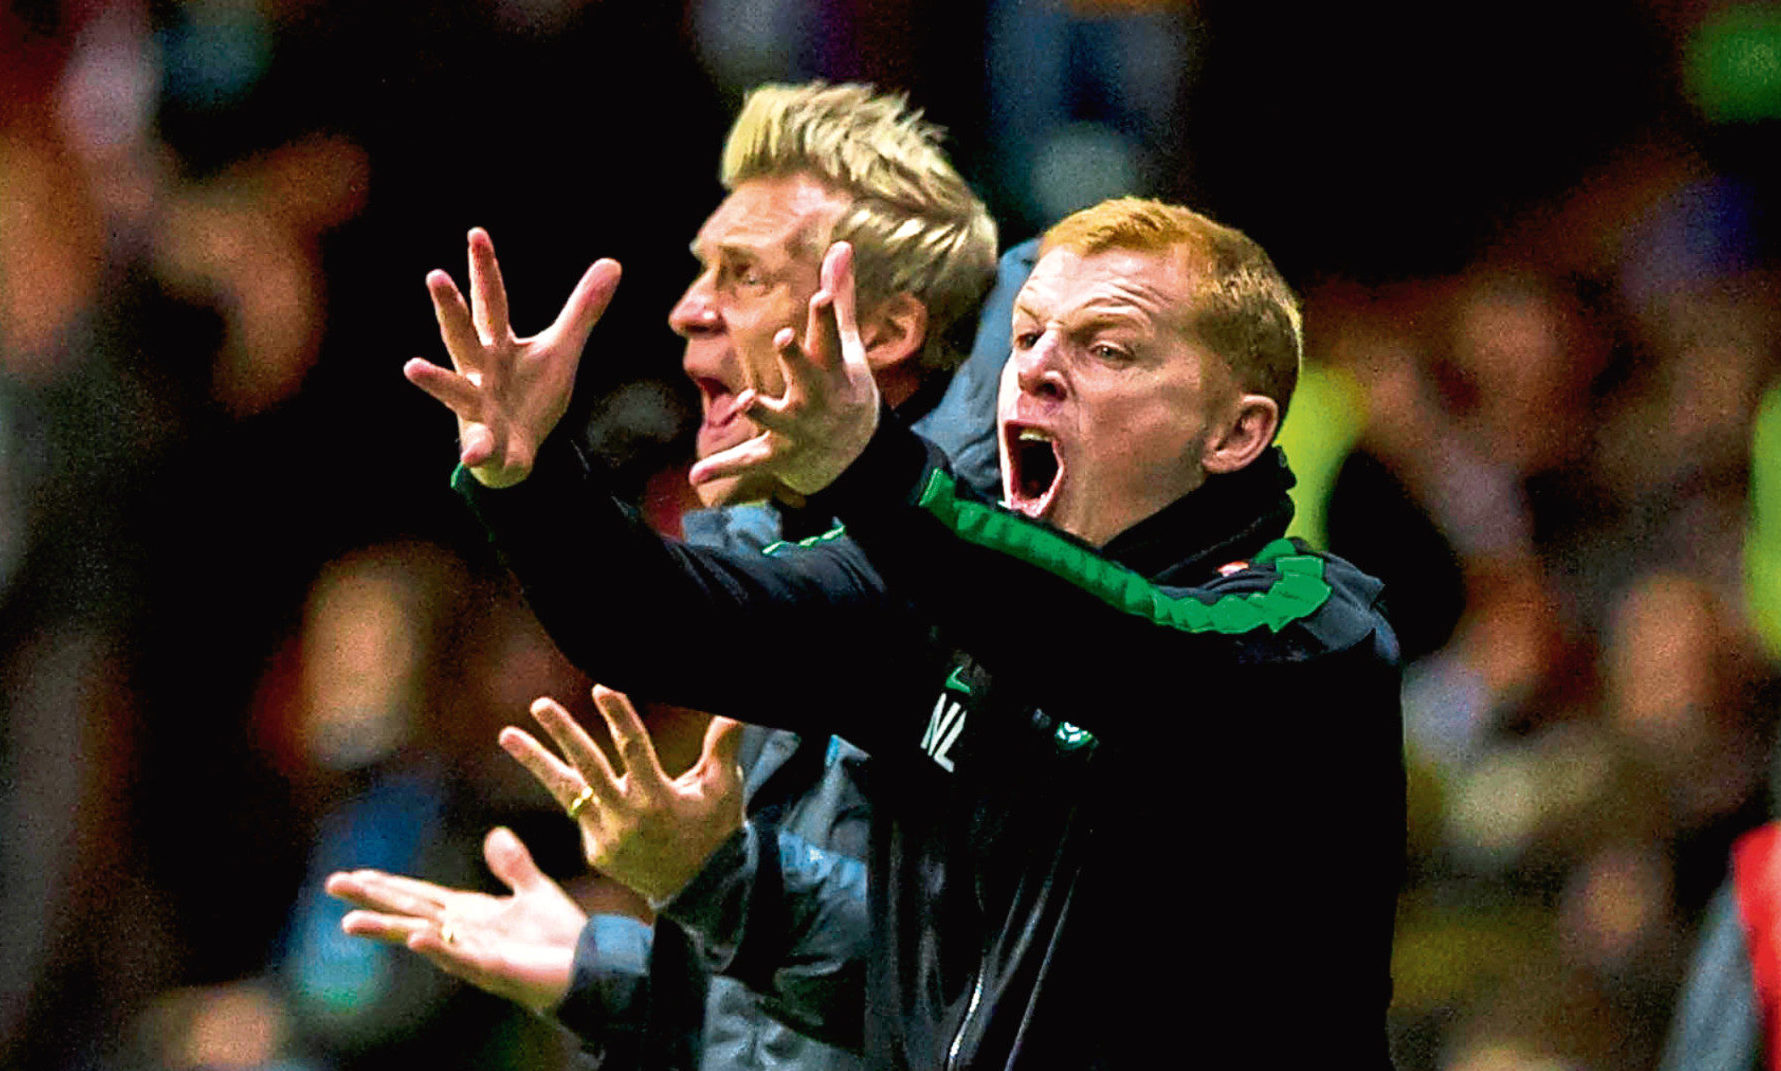 Celtic manager Neil Lennon (right) and assistant Johan Mjallby urge their team on from the sidelines, 2013